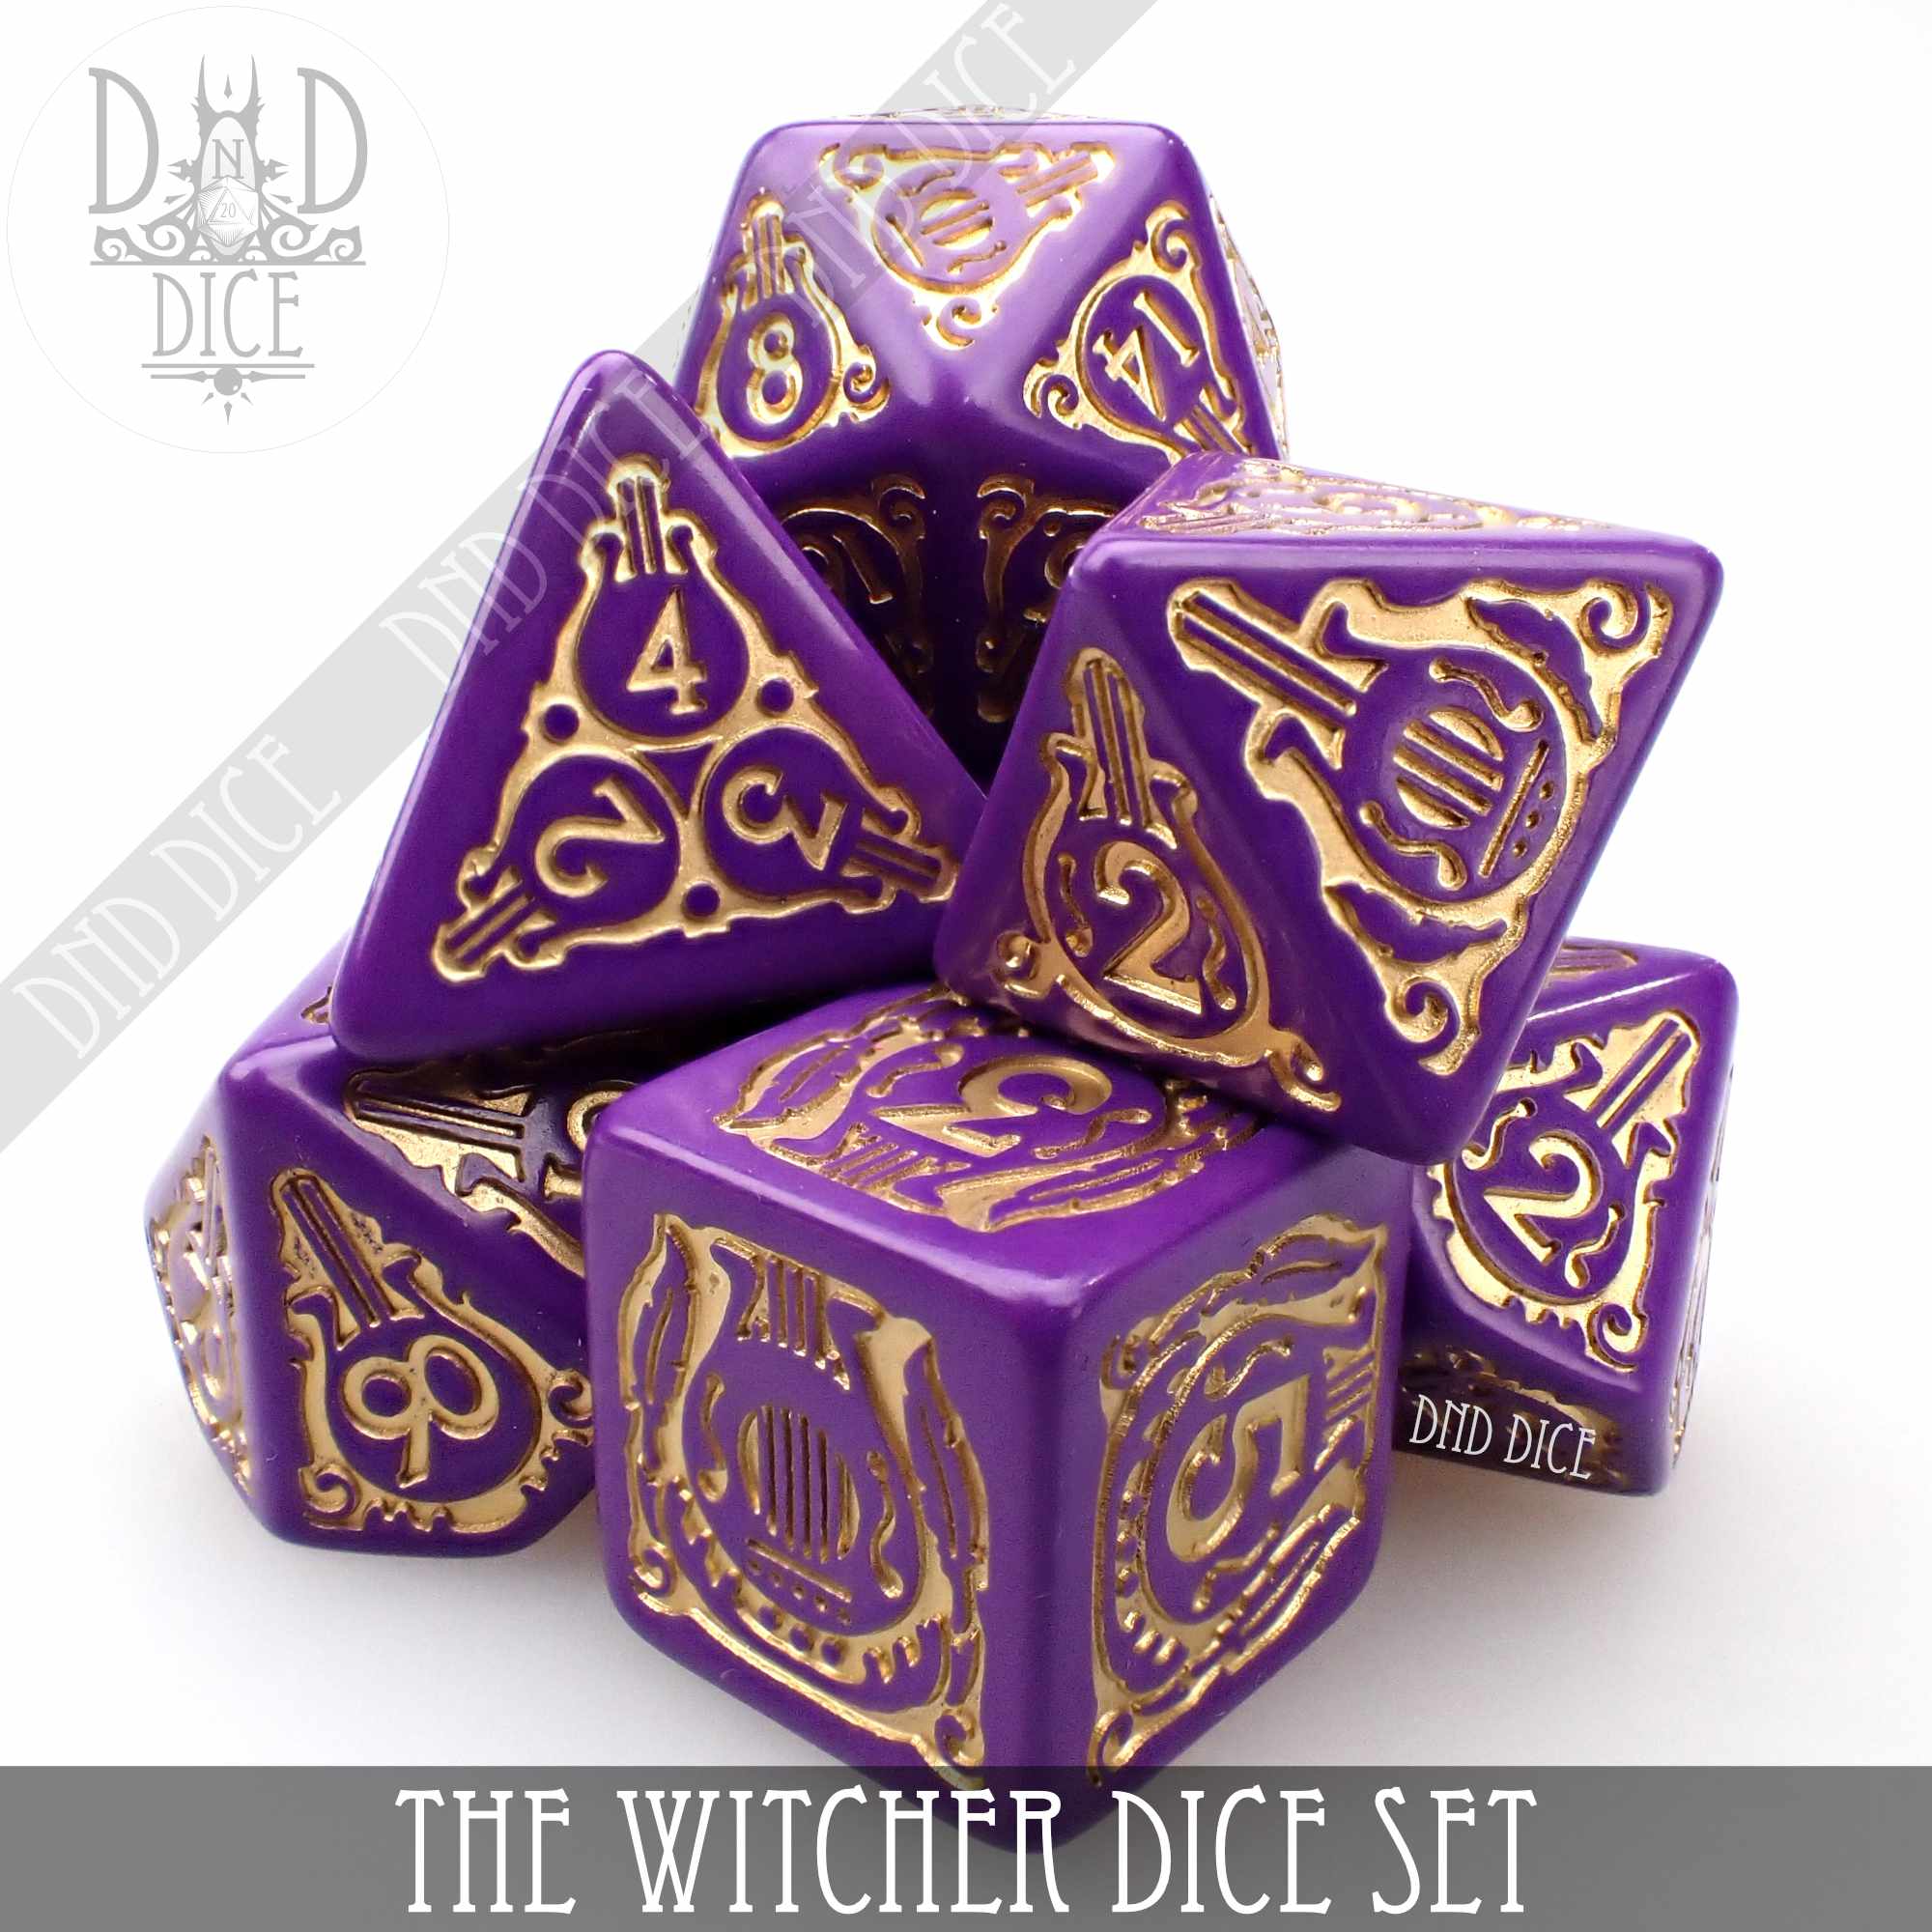 The Witcher Dice Set and Coin - Dandelion / Jaskier